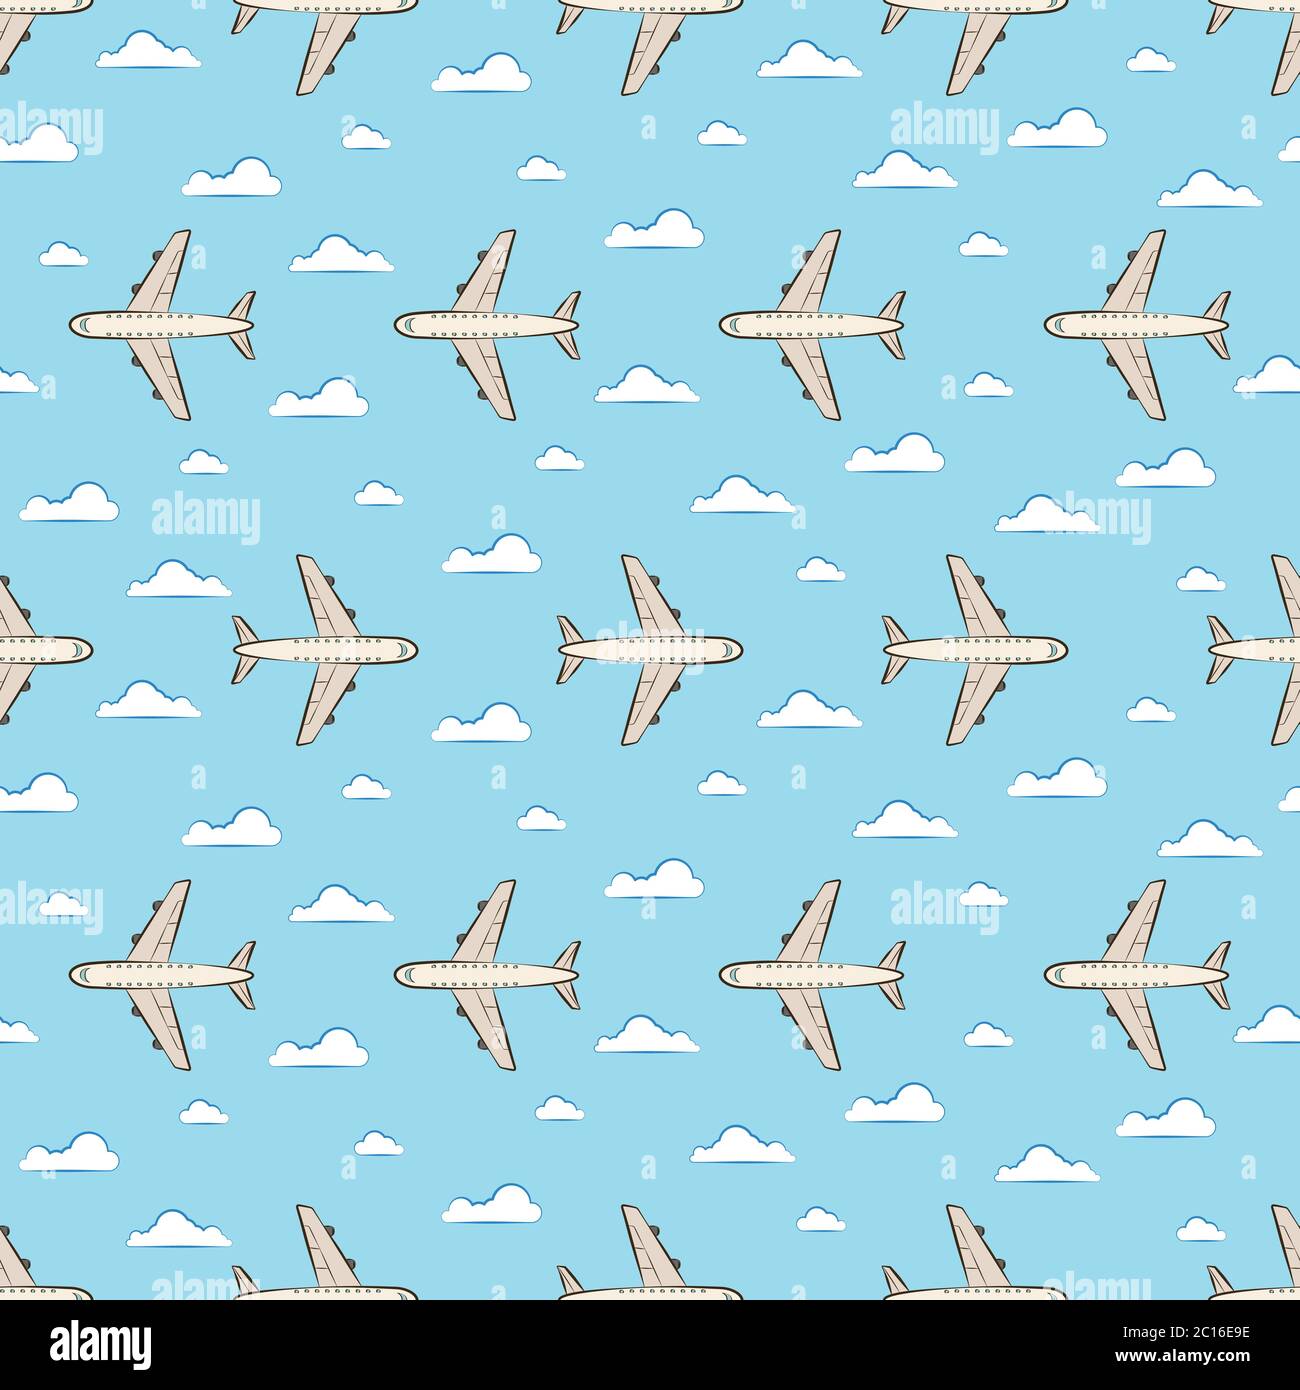 Seamless pattern with planes and clouds on blue background. Cute vector illustration flat style design for invitations, prints, wrapping paper, greeti Stock Vector